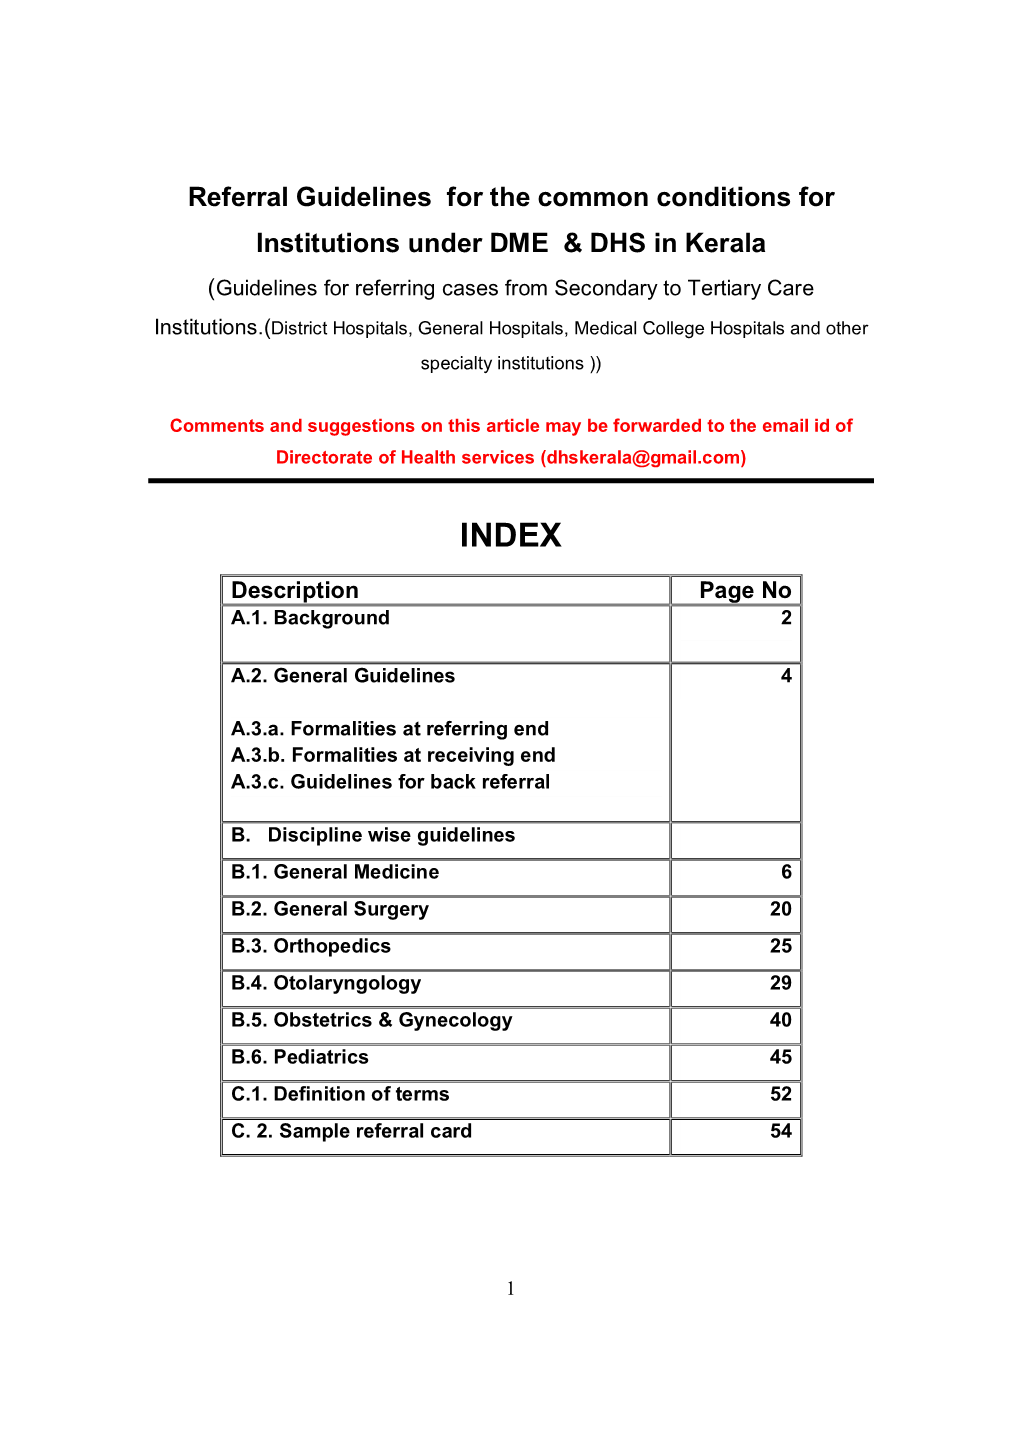 Referral Guidelines for the Common Conditions for Institutions Under DME & DHS in Kerala (Guidelines for Referring Cases from Secondary to Tertiary Care